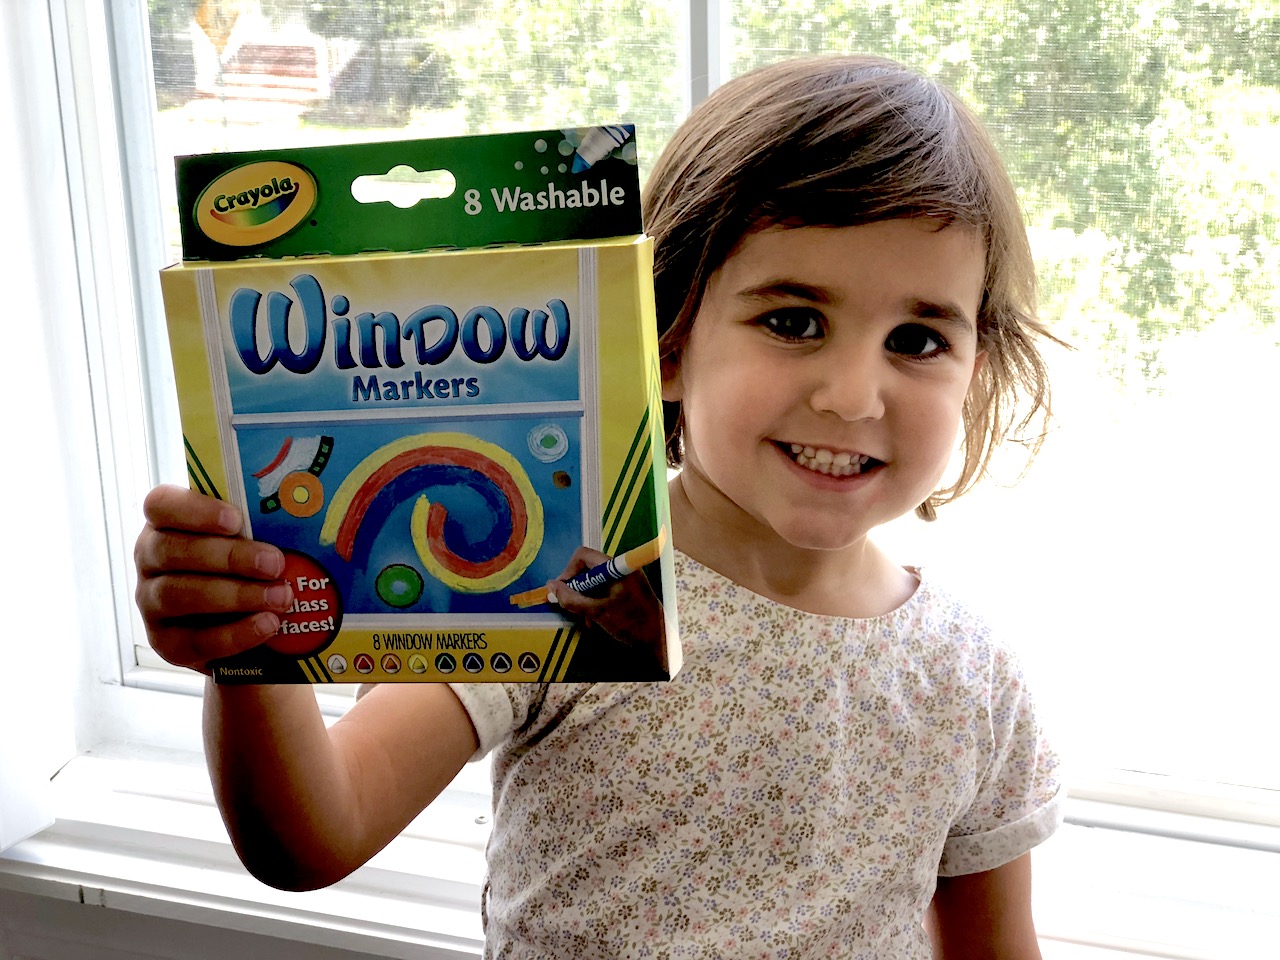 8 Count Crayola Crystal Effects Window Markers: What's Inside the Box